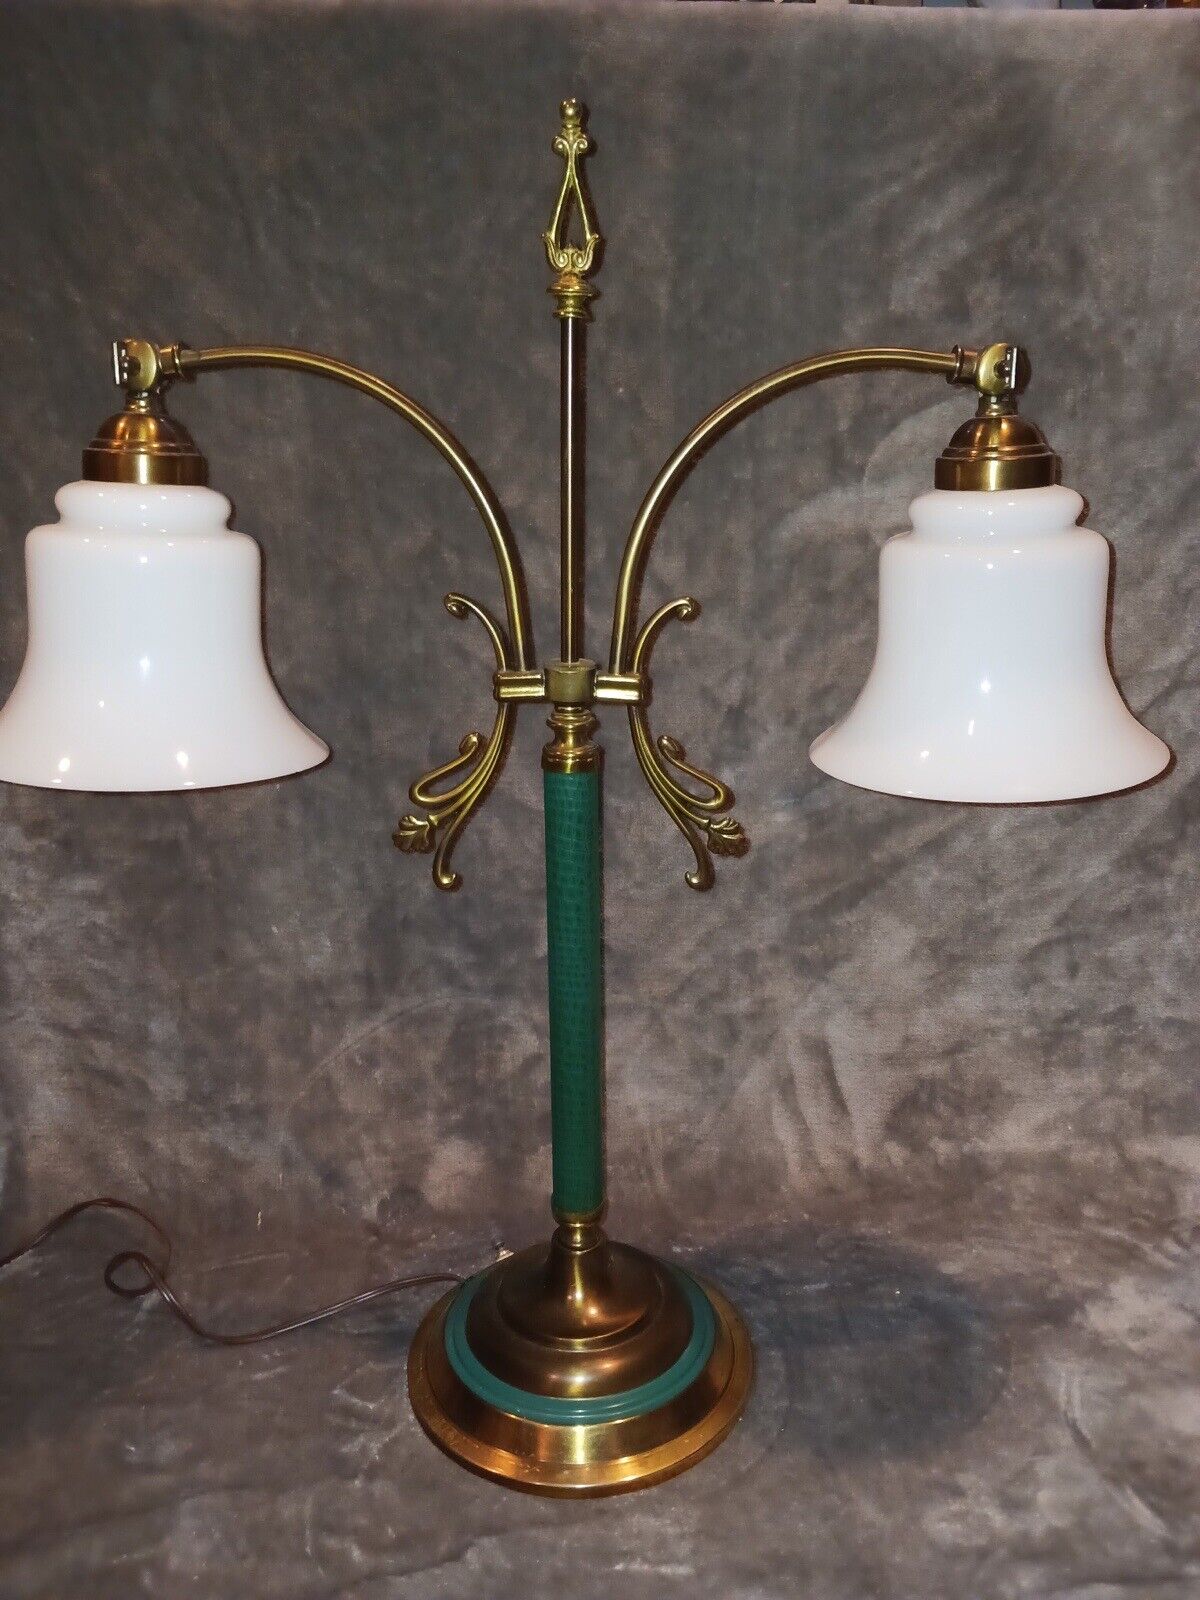 Gorgeous Double Arm Swivel Lamp With Ornate Brass And Faux Alligator Leather